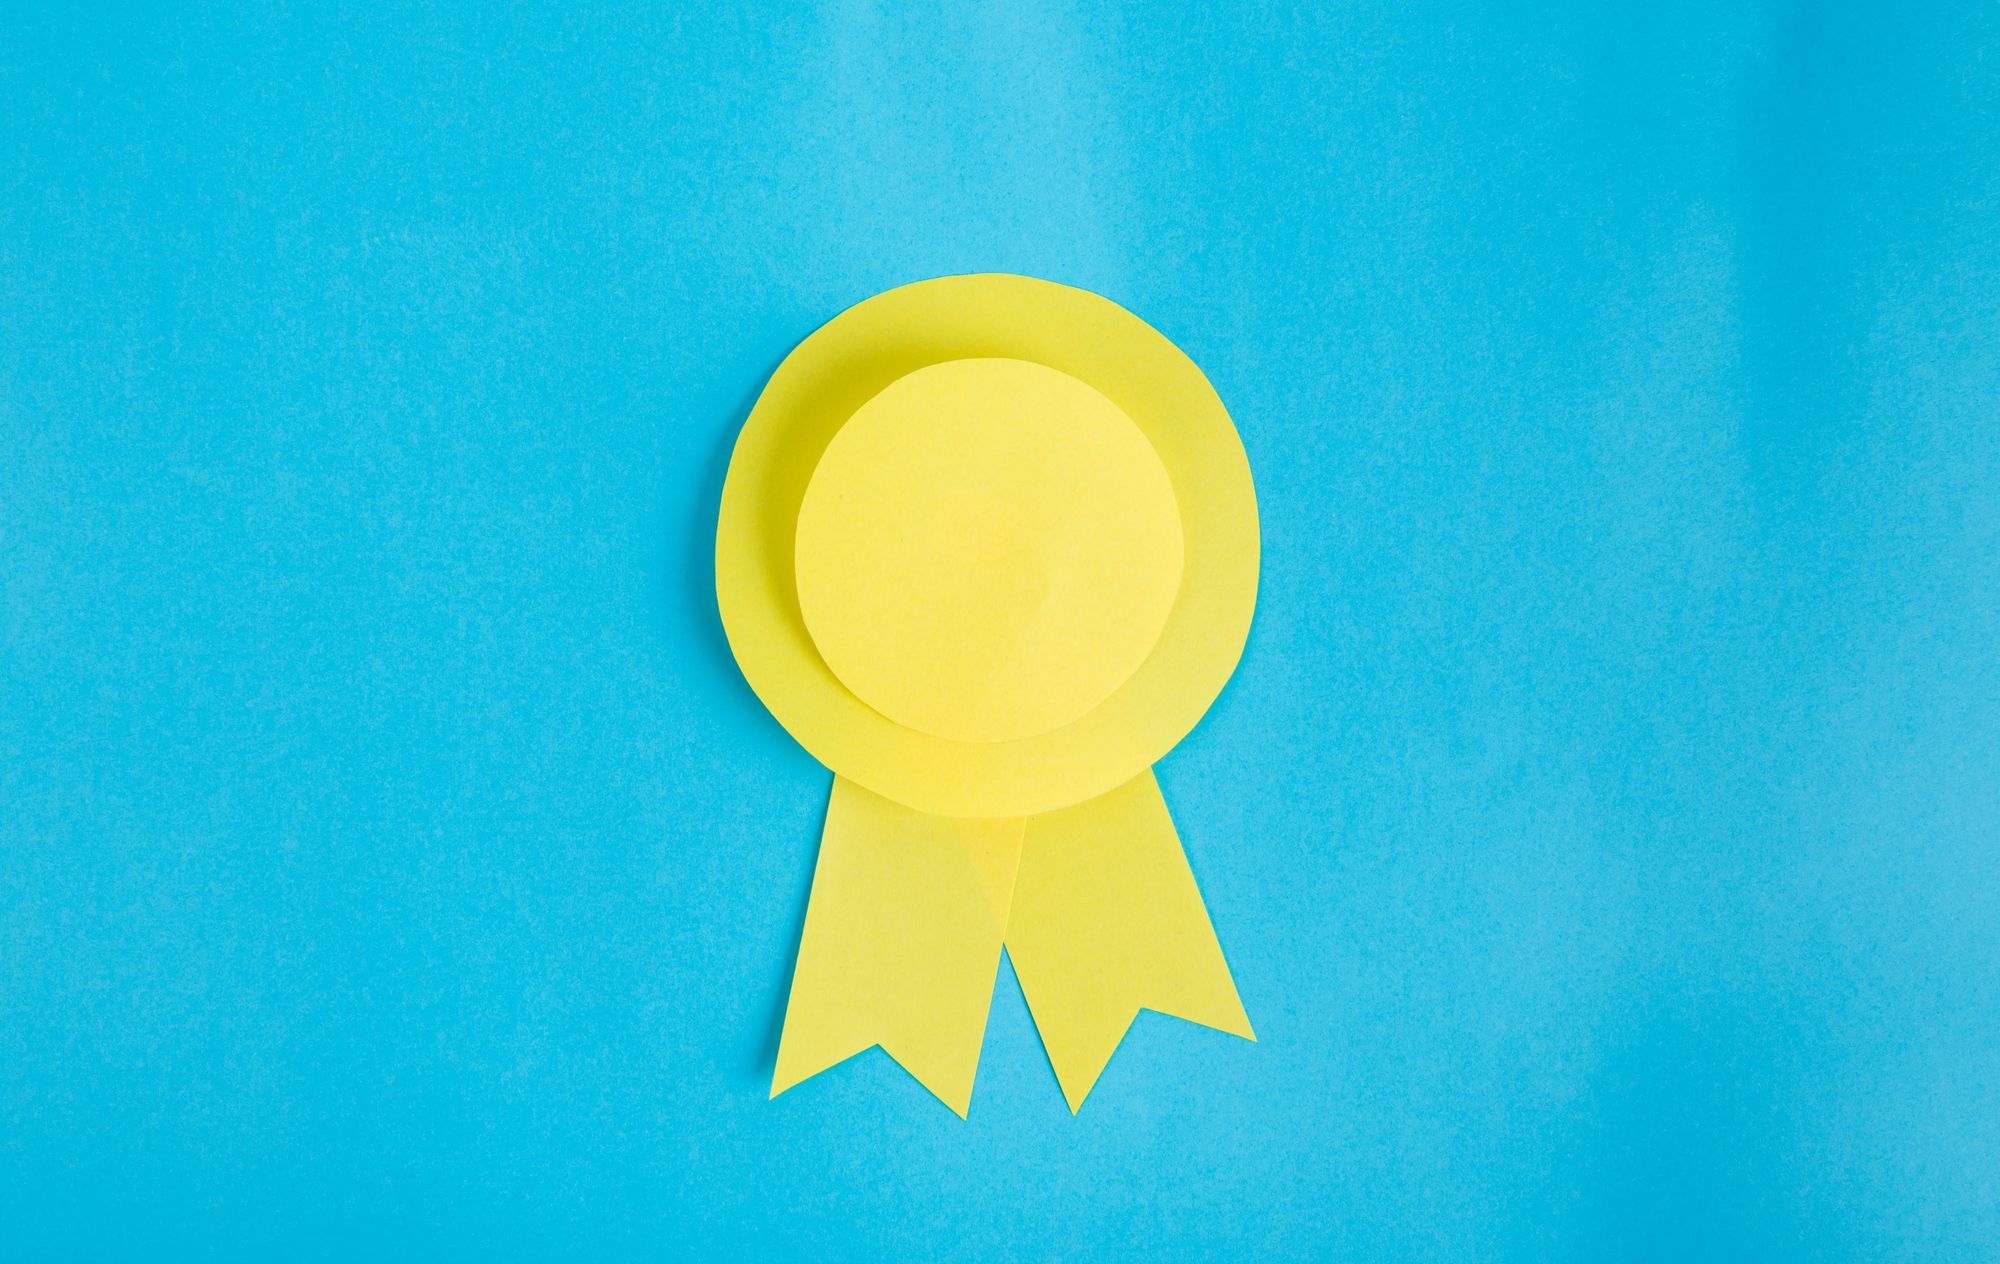 Stock photo of a yellow medal made from paper.